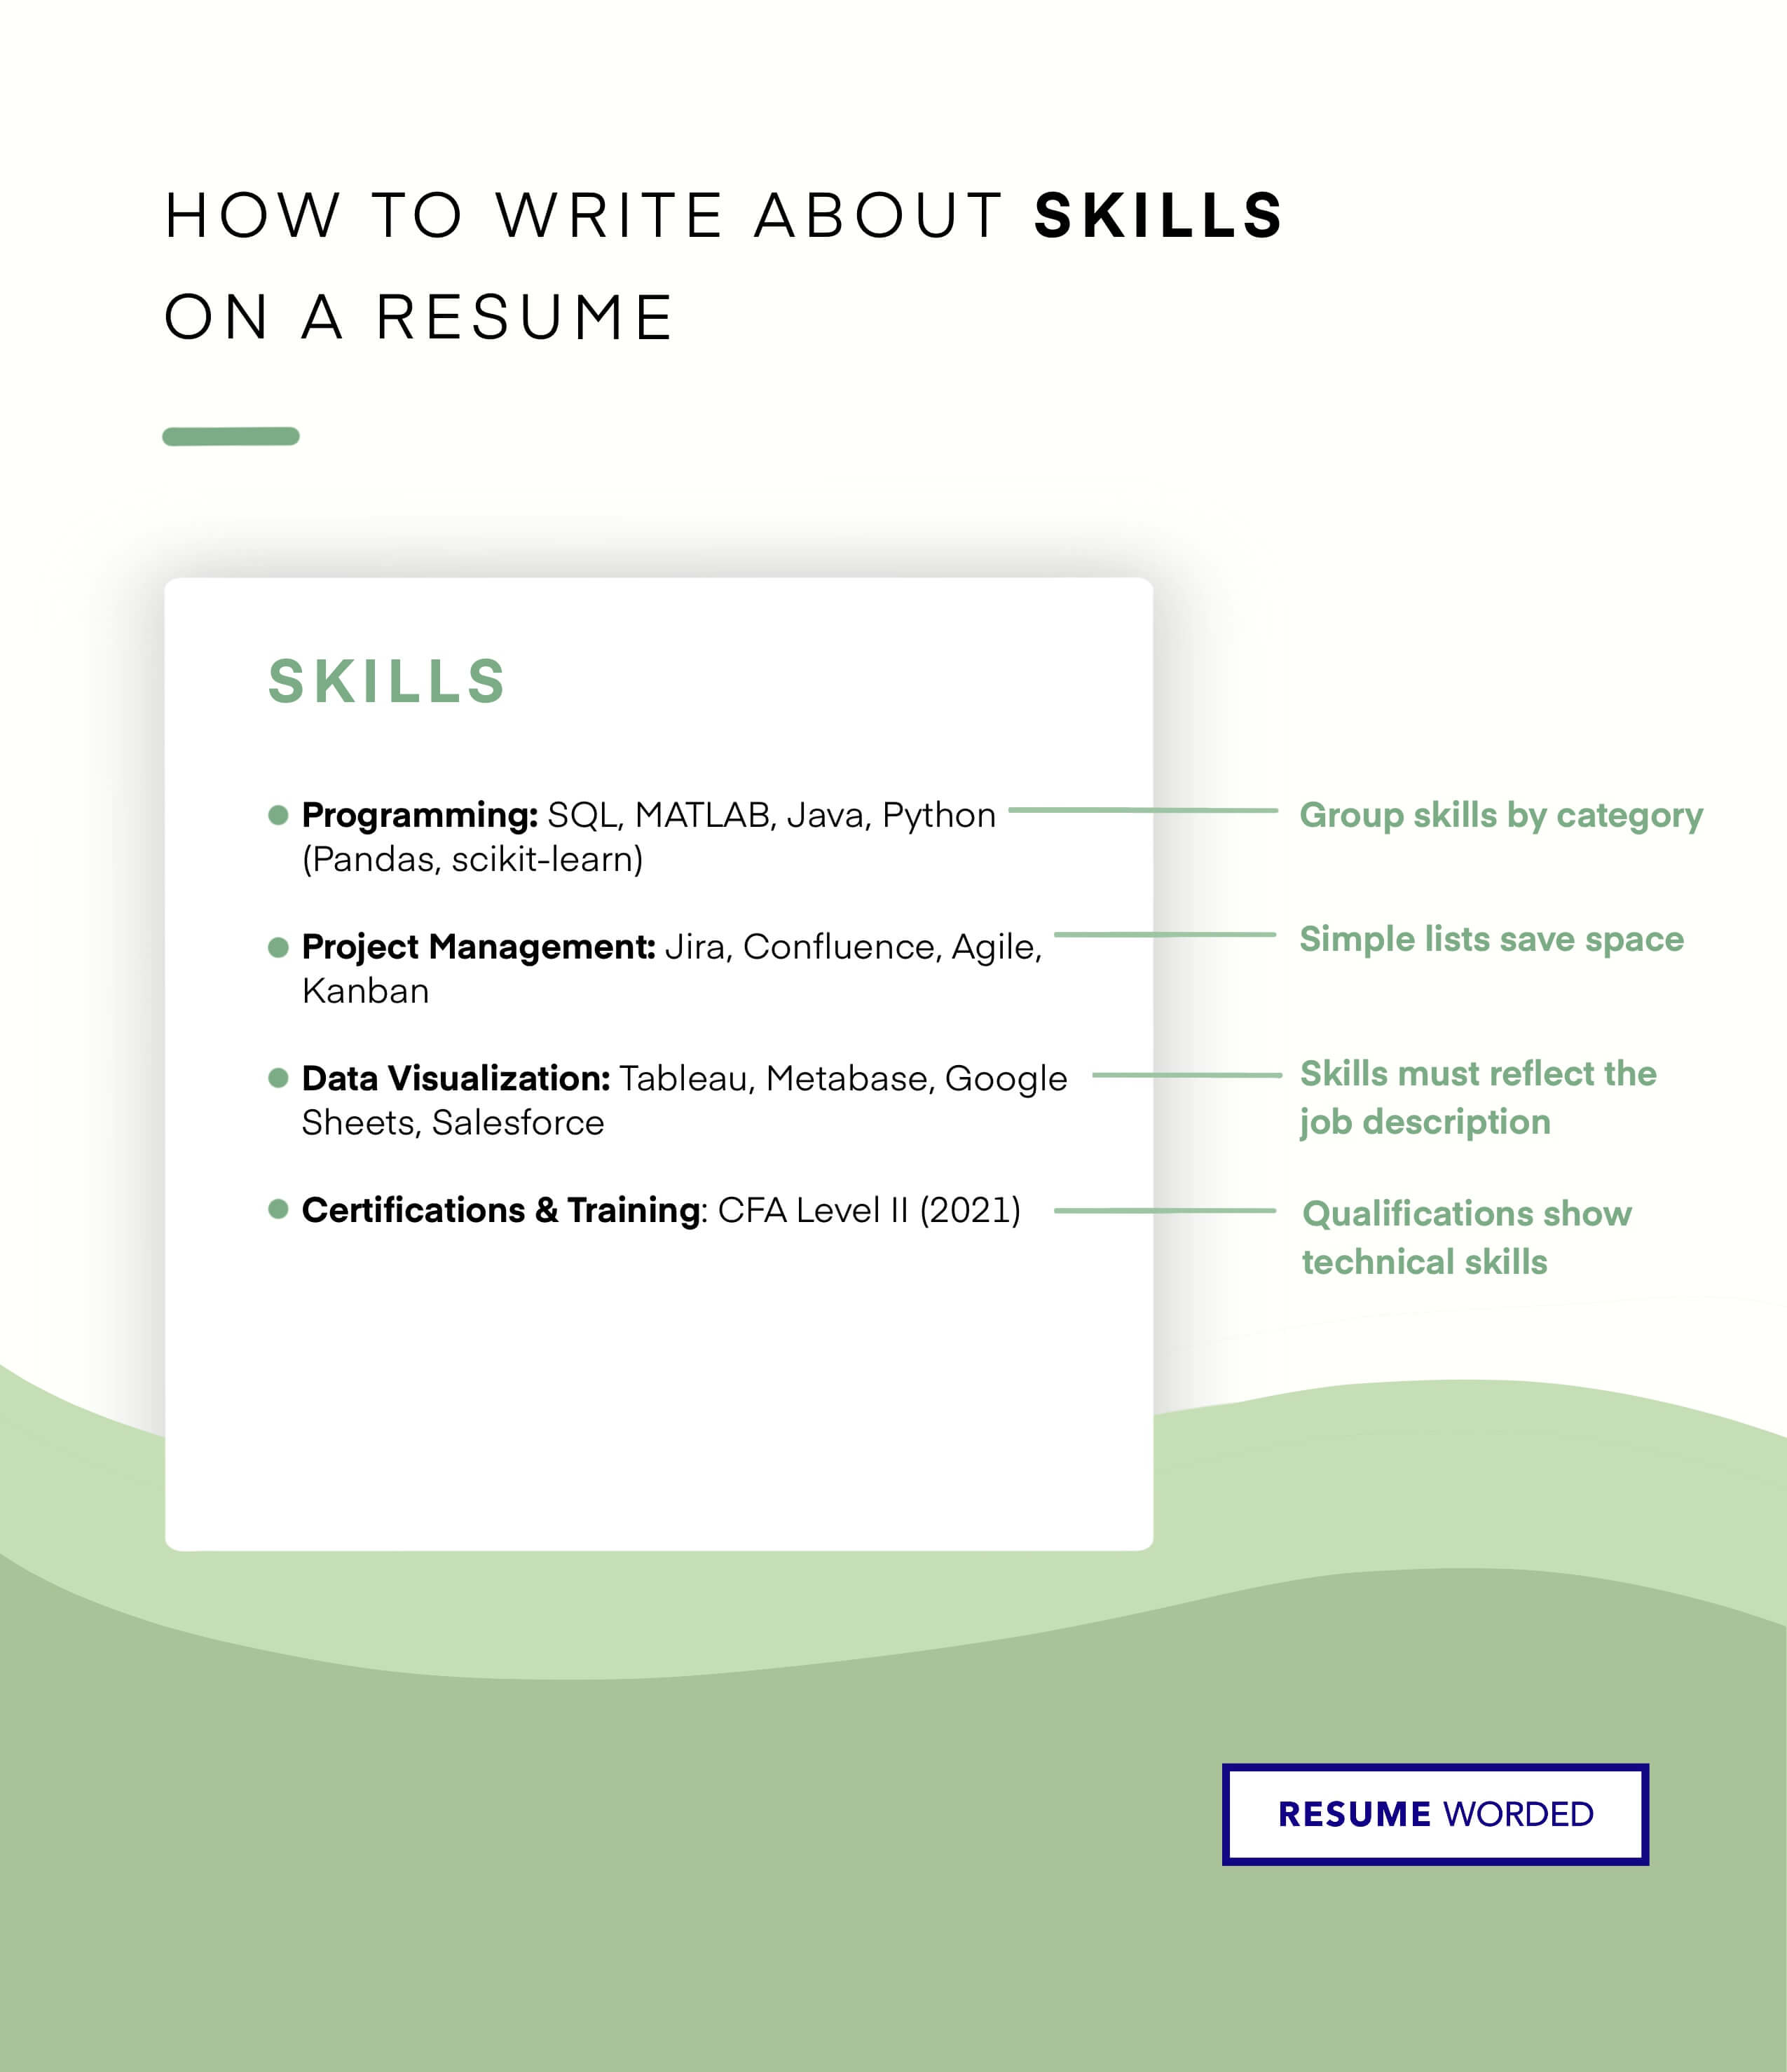 Include the skills level for skills you are excellent at. - Fixed Asset Accountant Resume